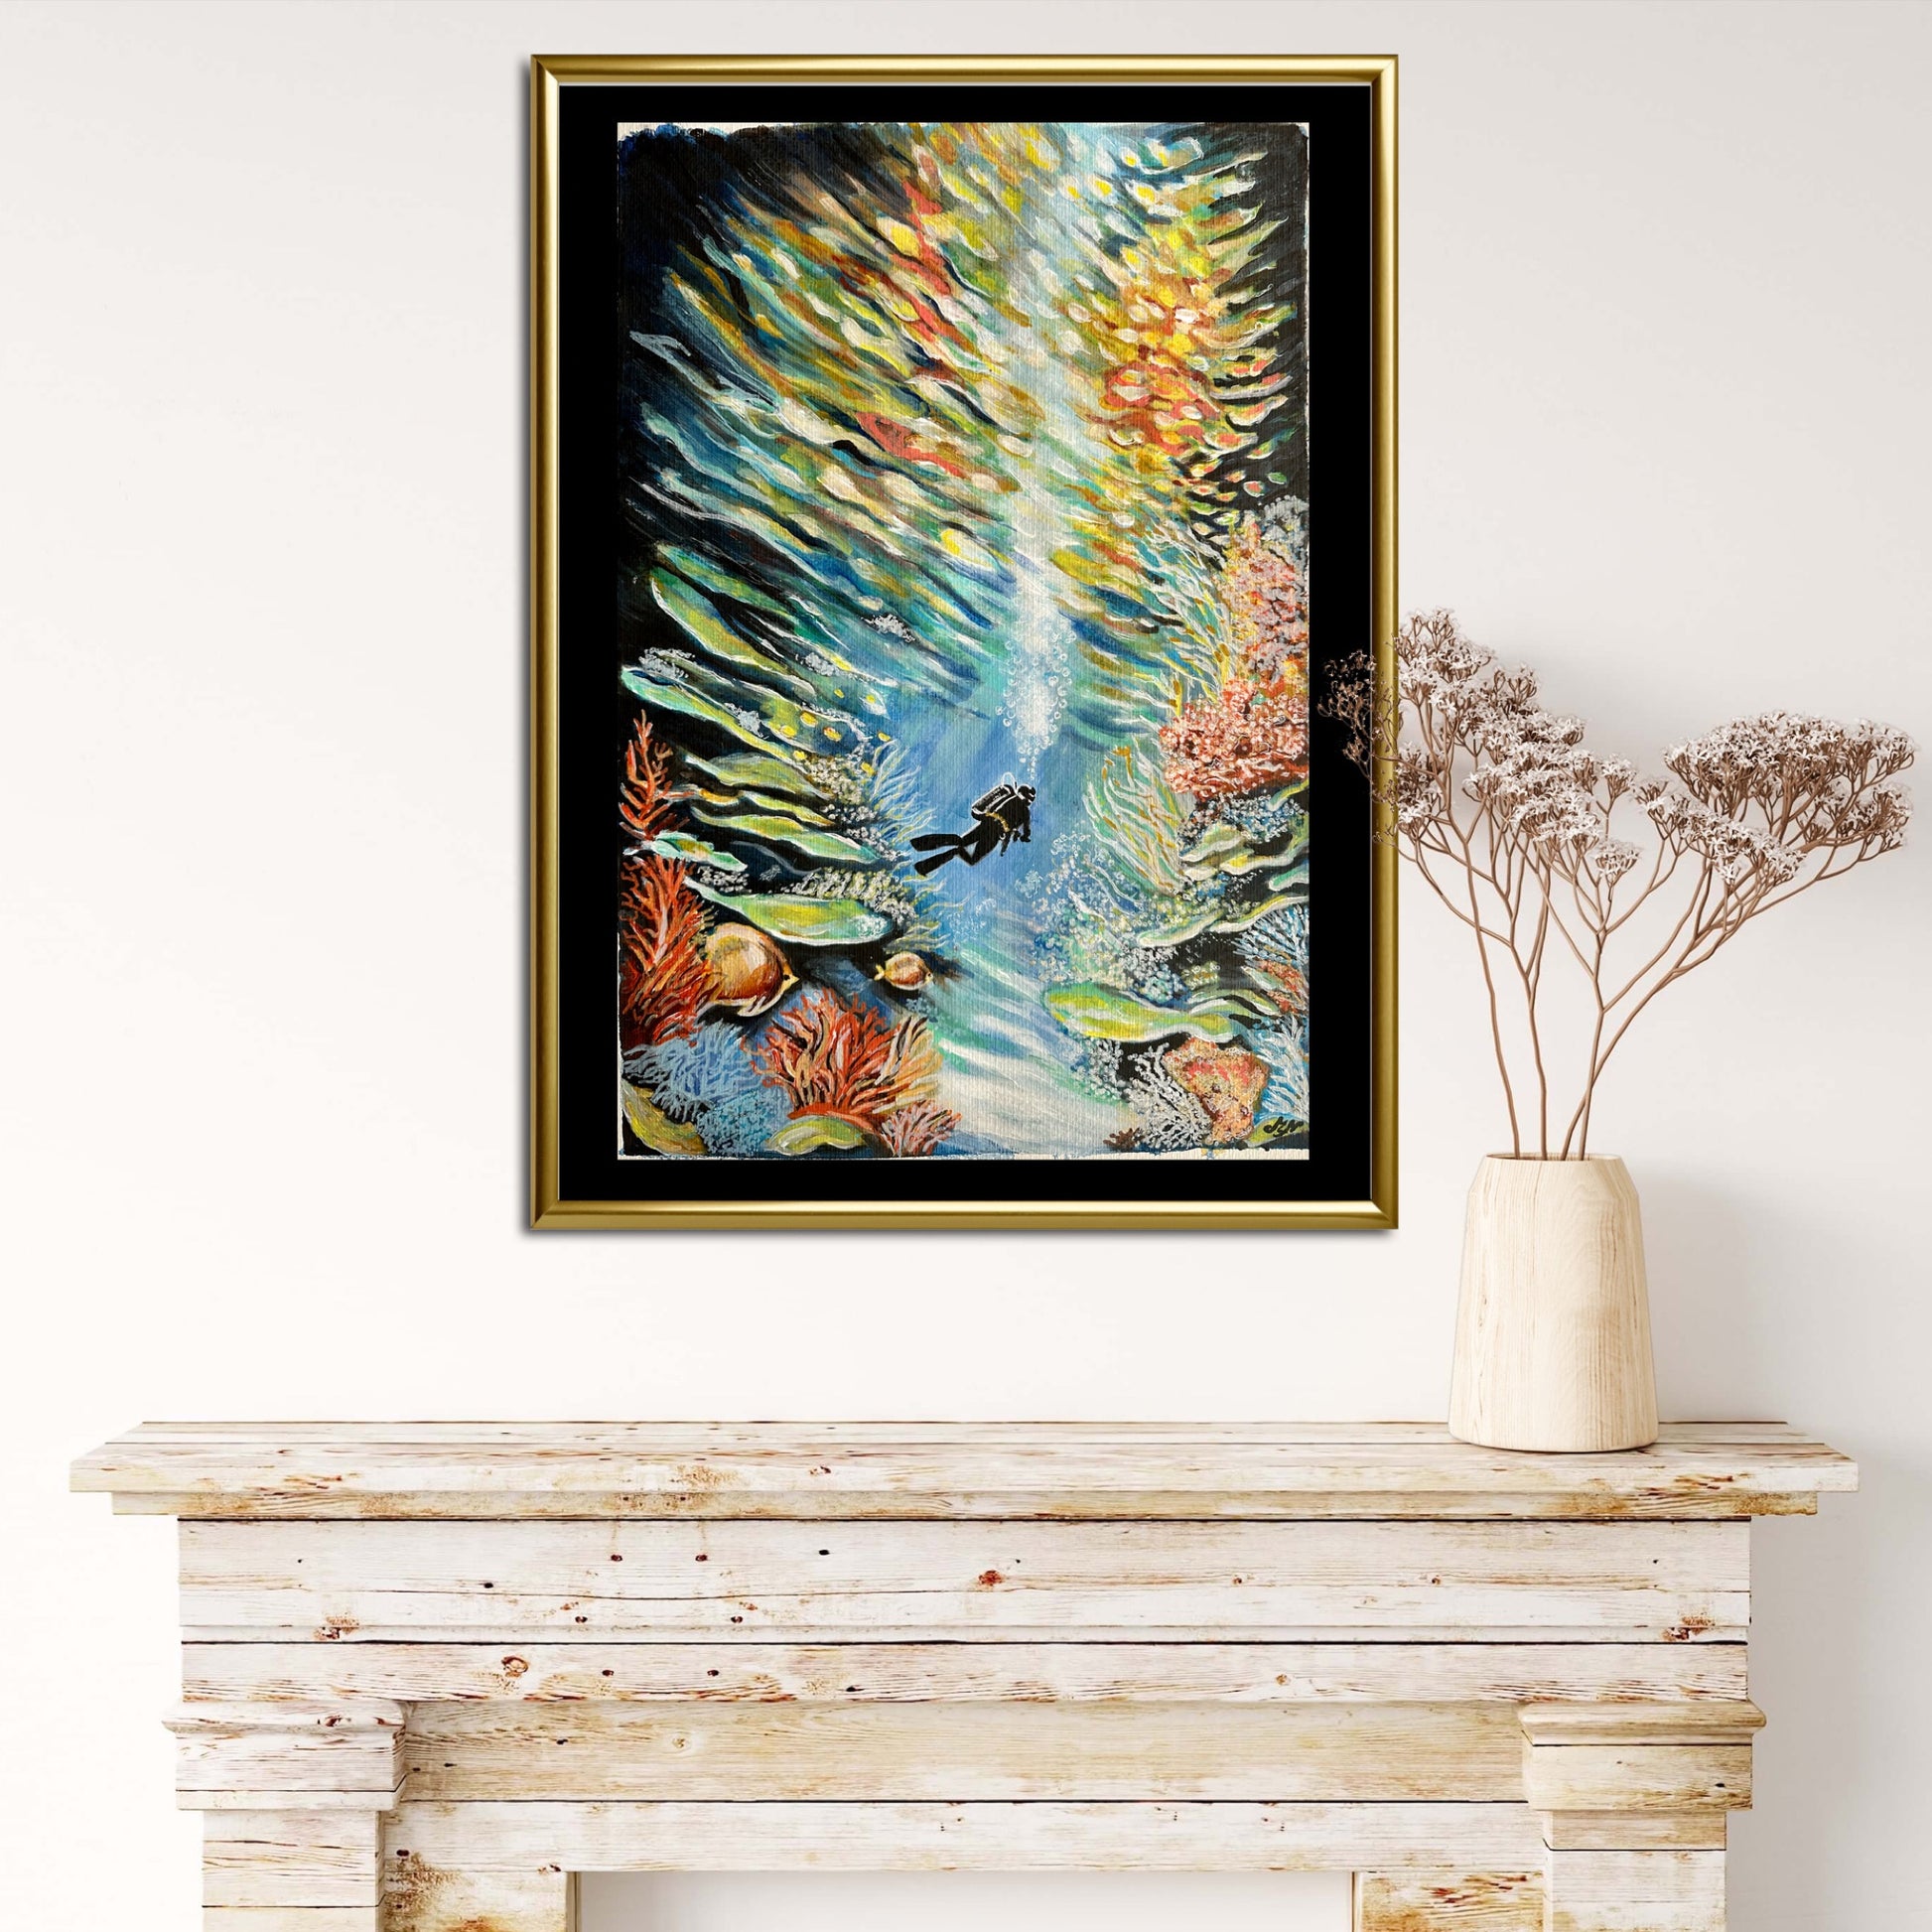 "Painting of a diver and vibrant coral reef with shimmering sunlight, on aquarelle fine art paper."